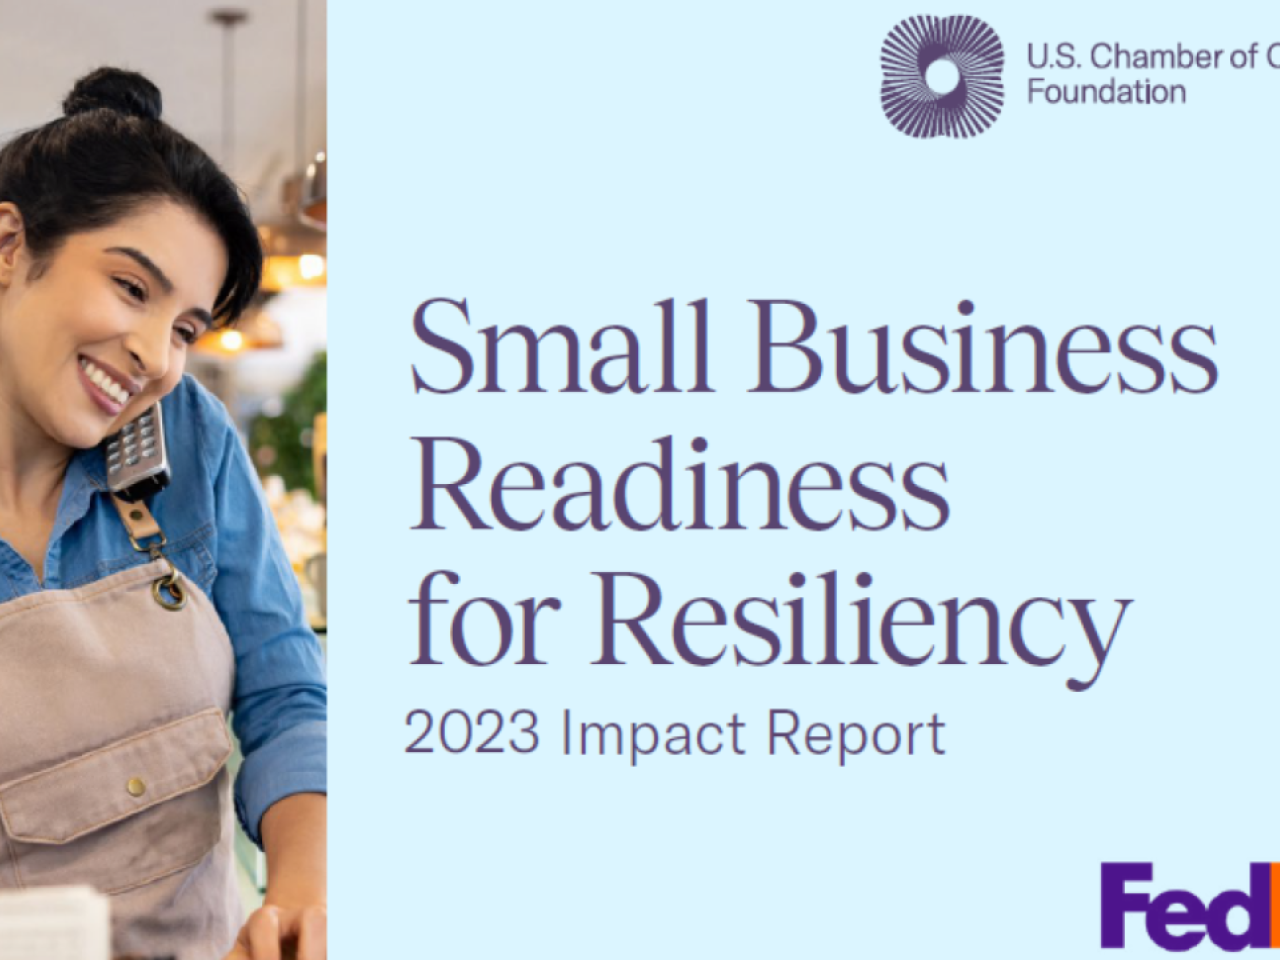 "Small Business Readiness for Resiliency 2023 Impact Report"